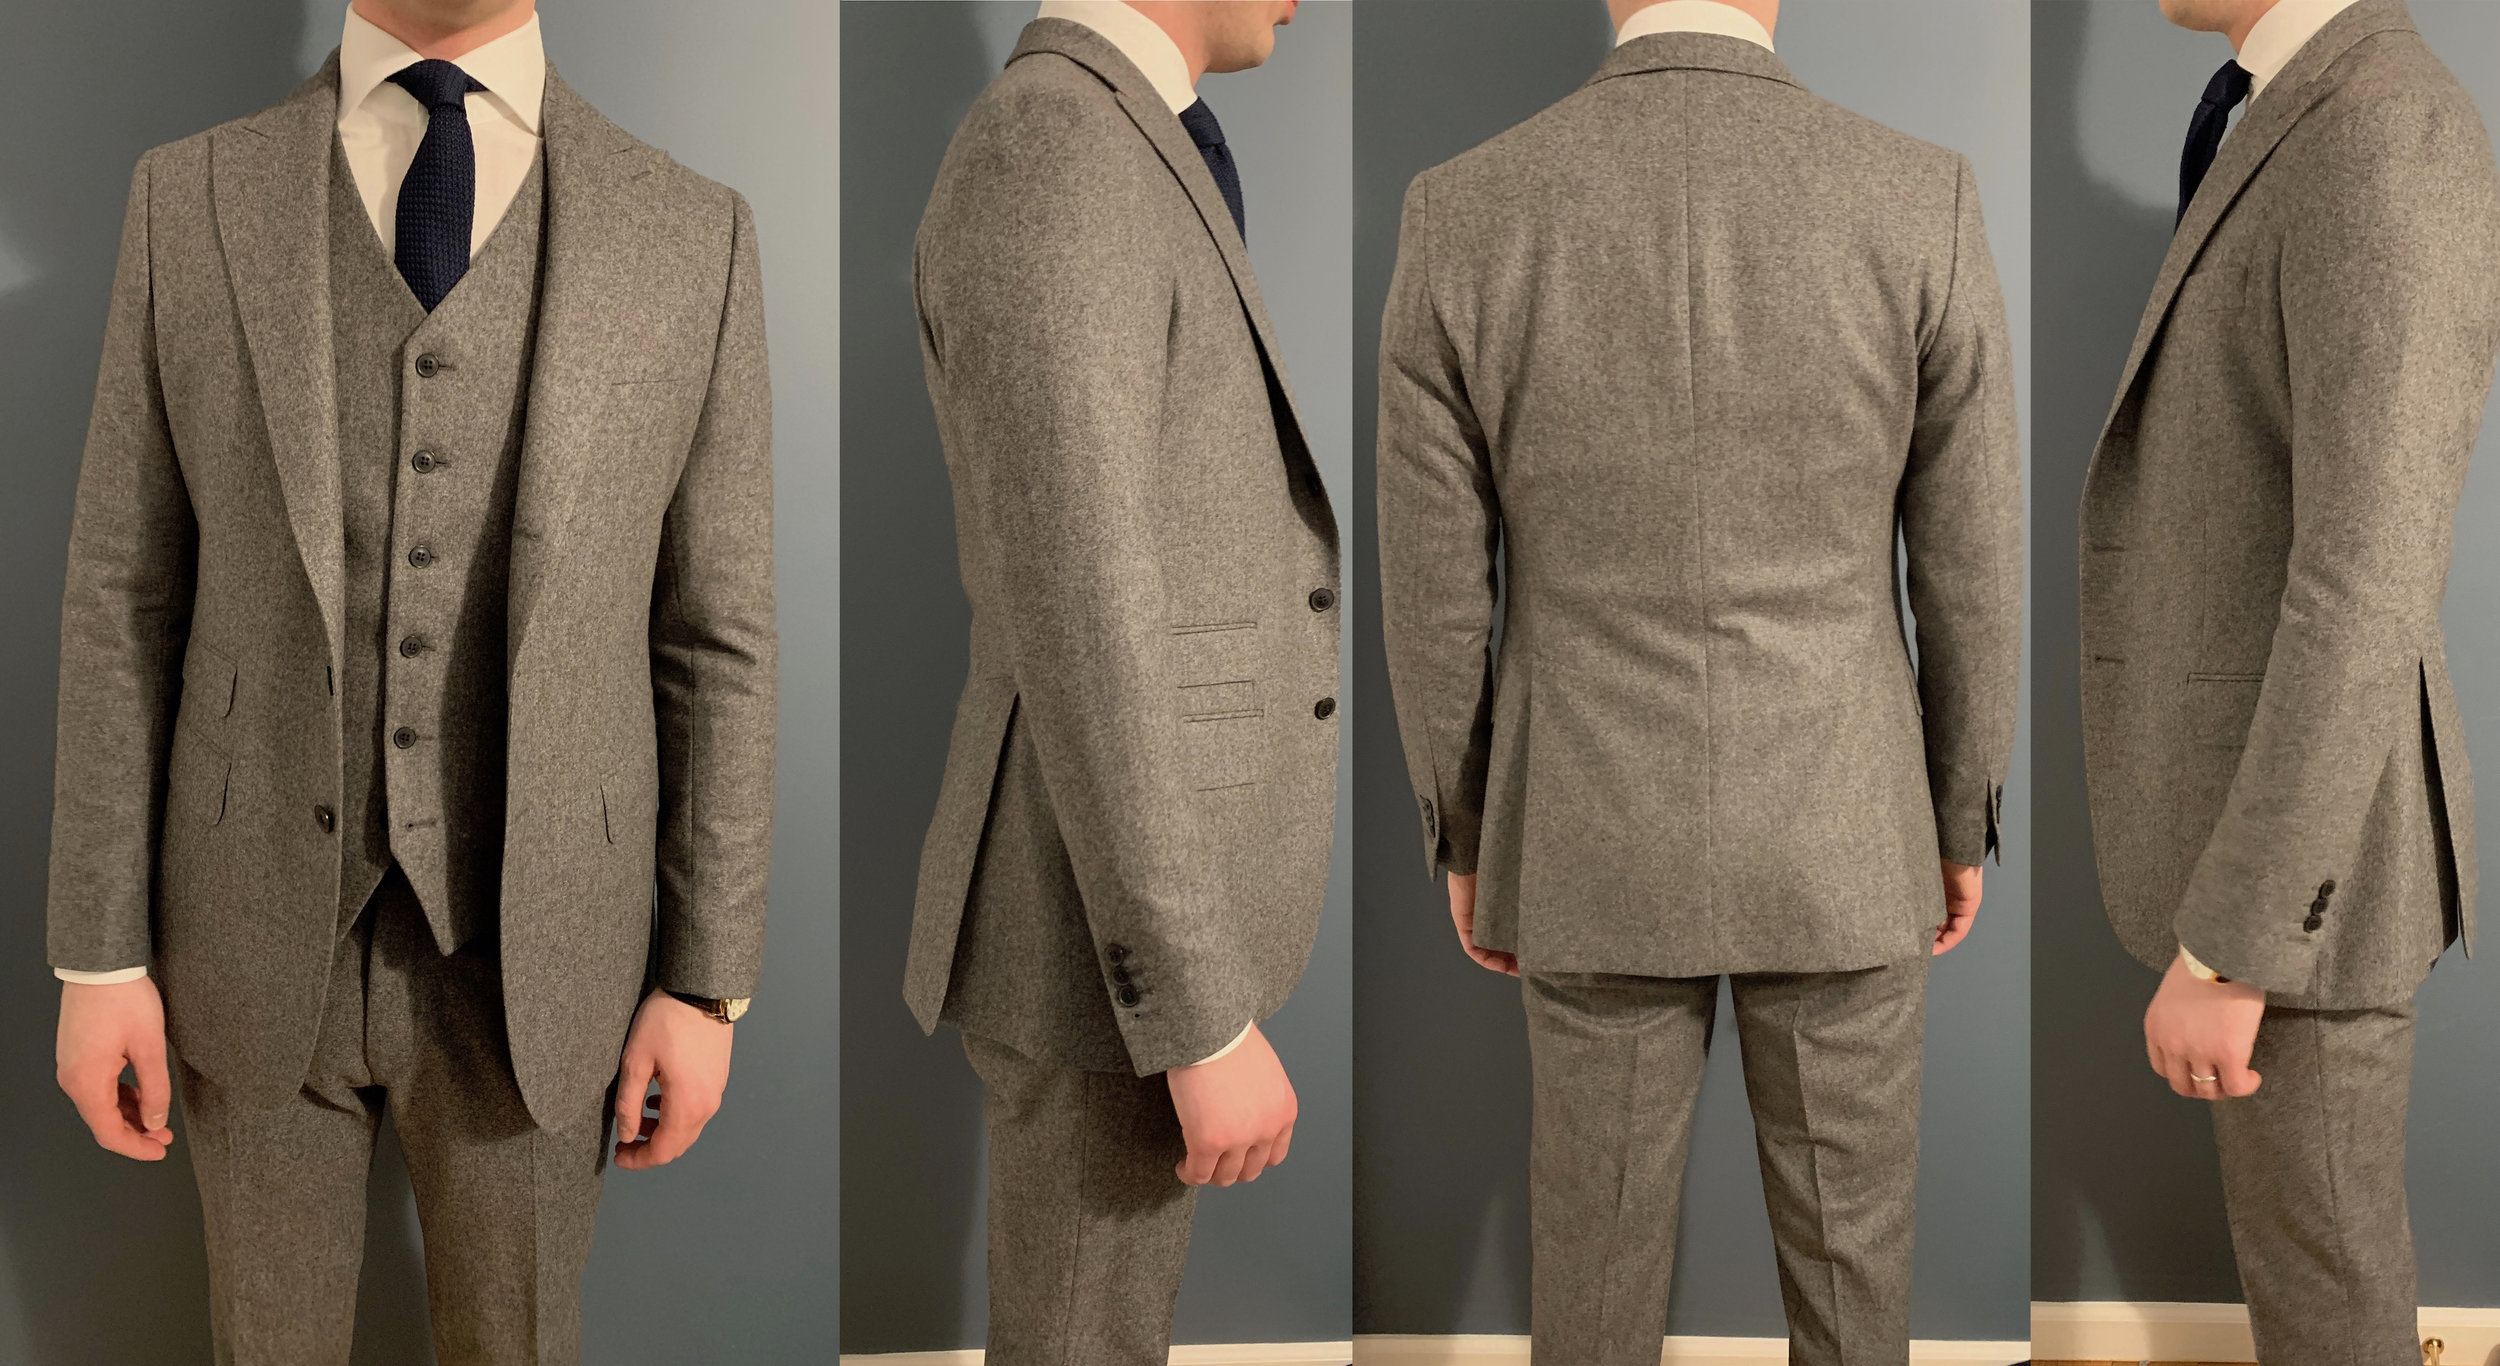 Suit Alterations for Men: What a Tailor Can & Can't Do - Oliver Wicks